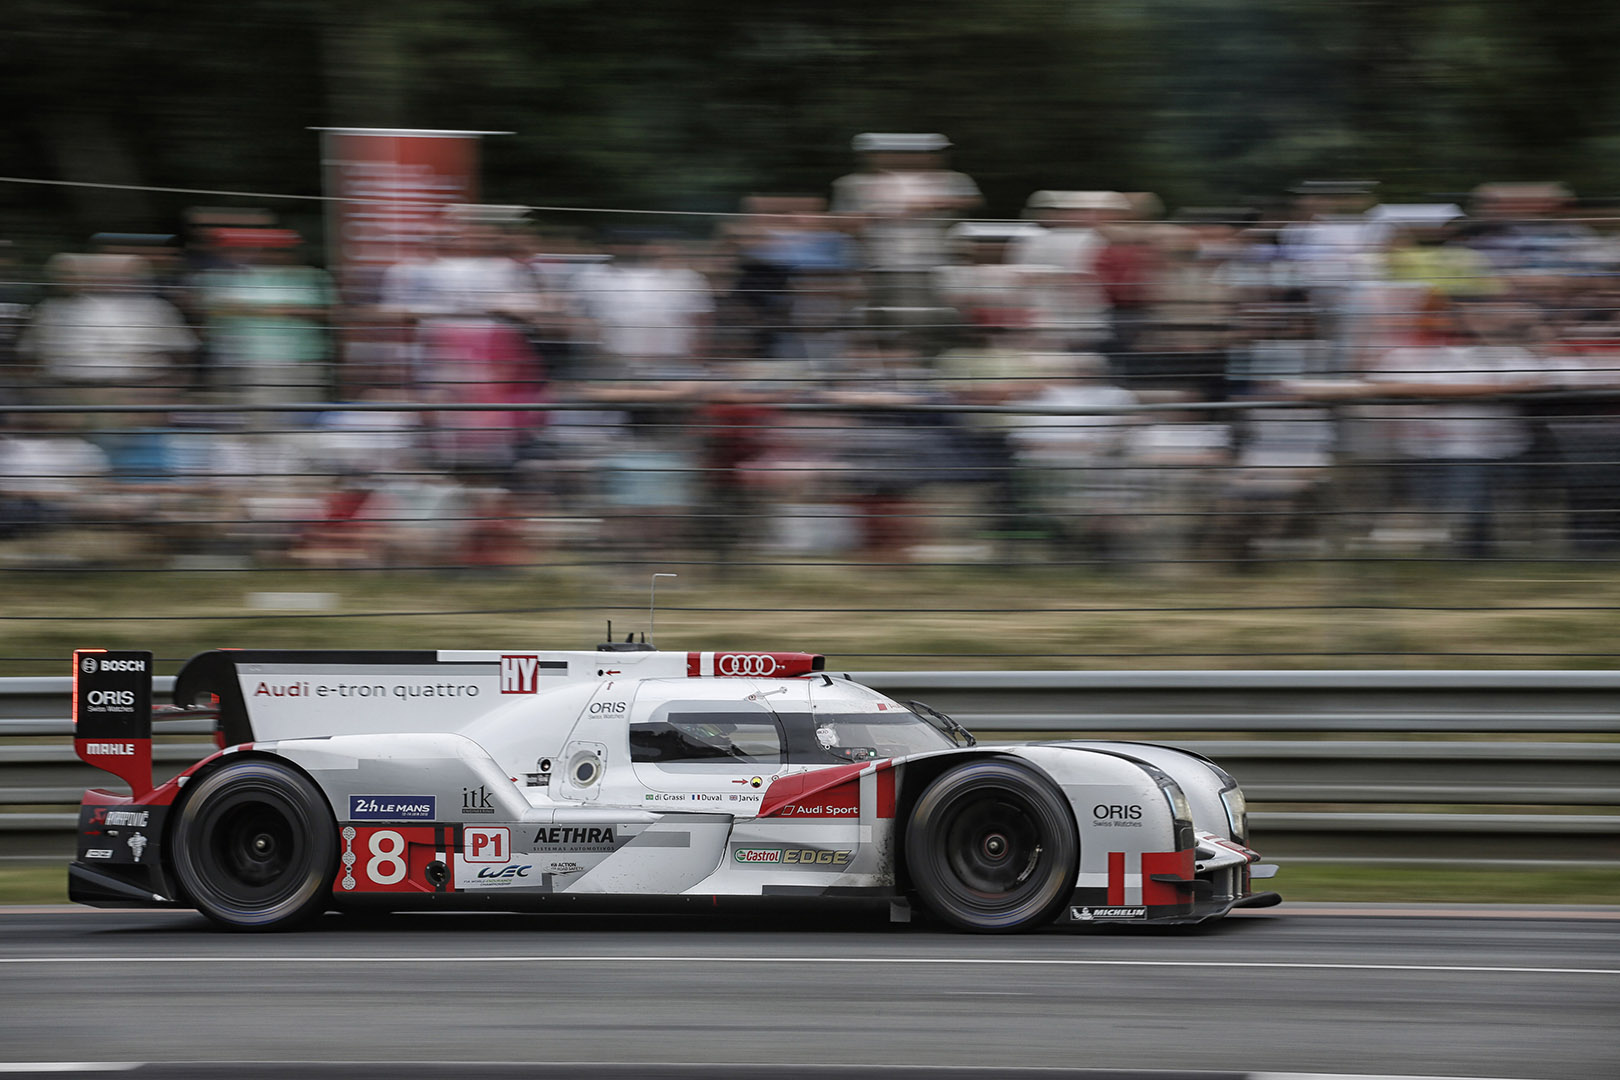 08 DUVAL Loic (FRA) DI GRASSI Lucas (BRA) JARVIS Oliver (GBR) AUDI R18 ETron Quattro team Audi Sport Joest action during the 2015 Le Mans 24 hours race, from June 13 to 14th 2015, at Le Mans circuit, France. Photo Francois Flamand / DPPI